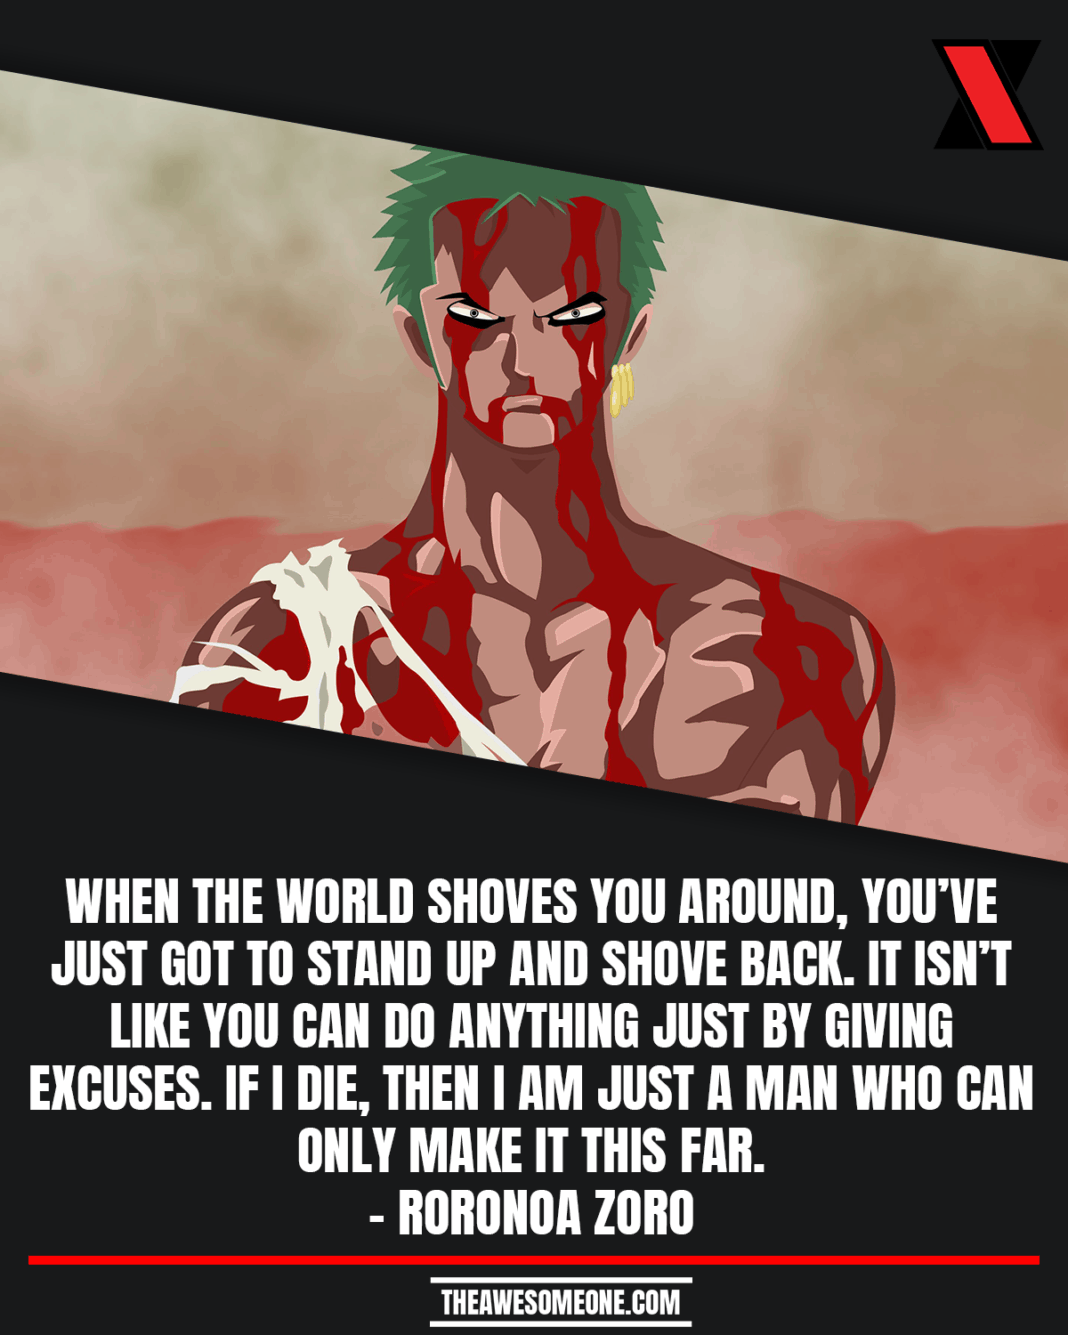 75 One Piece Quotes | Meaningful Quotes • The Awesome One